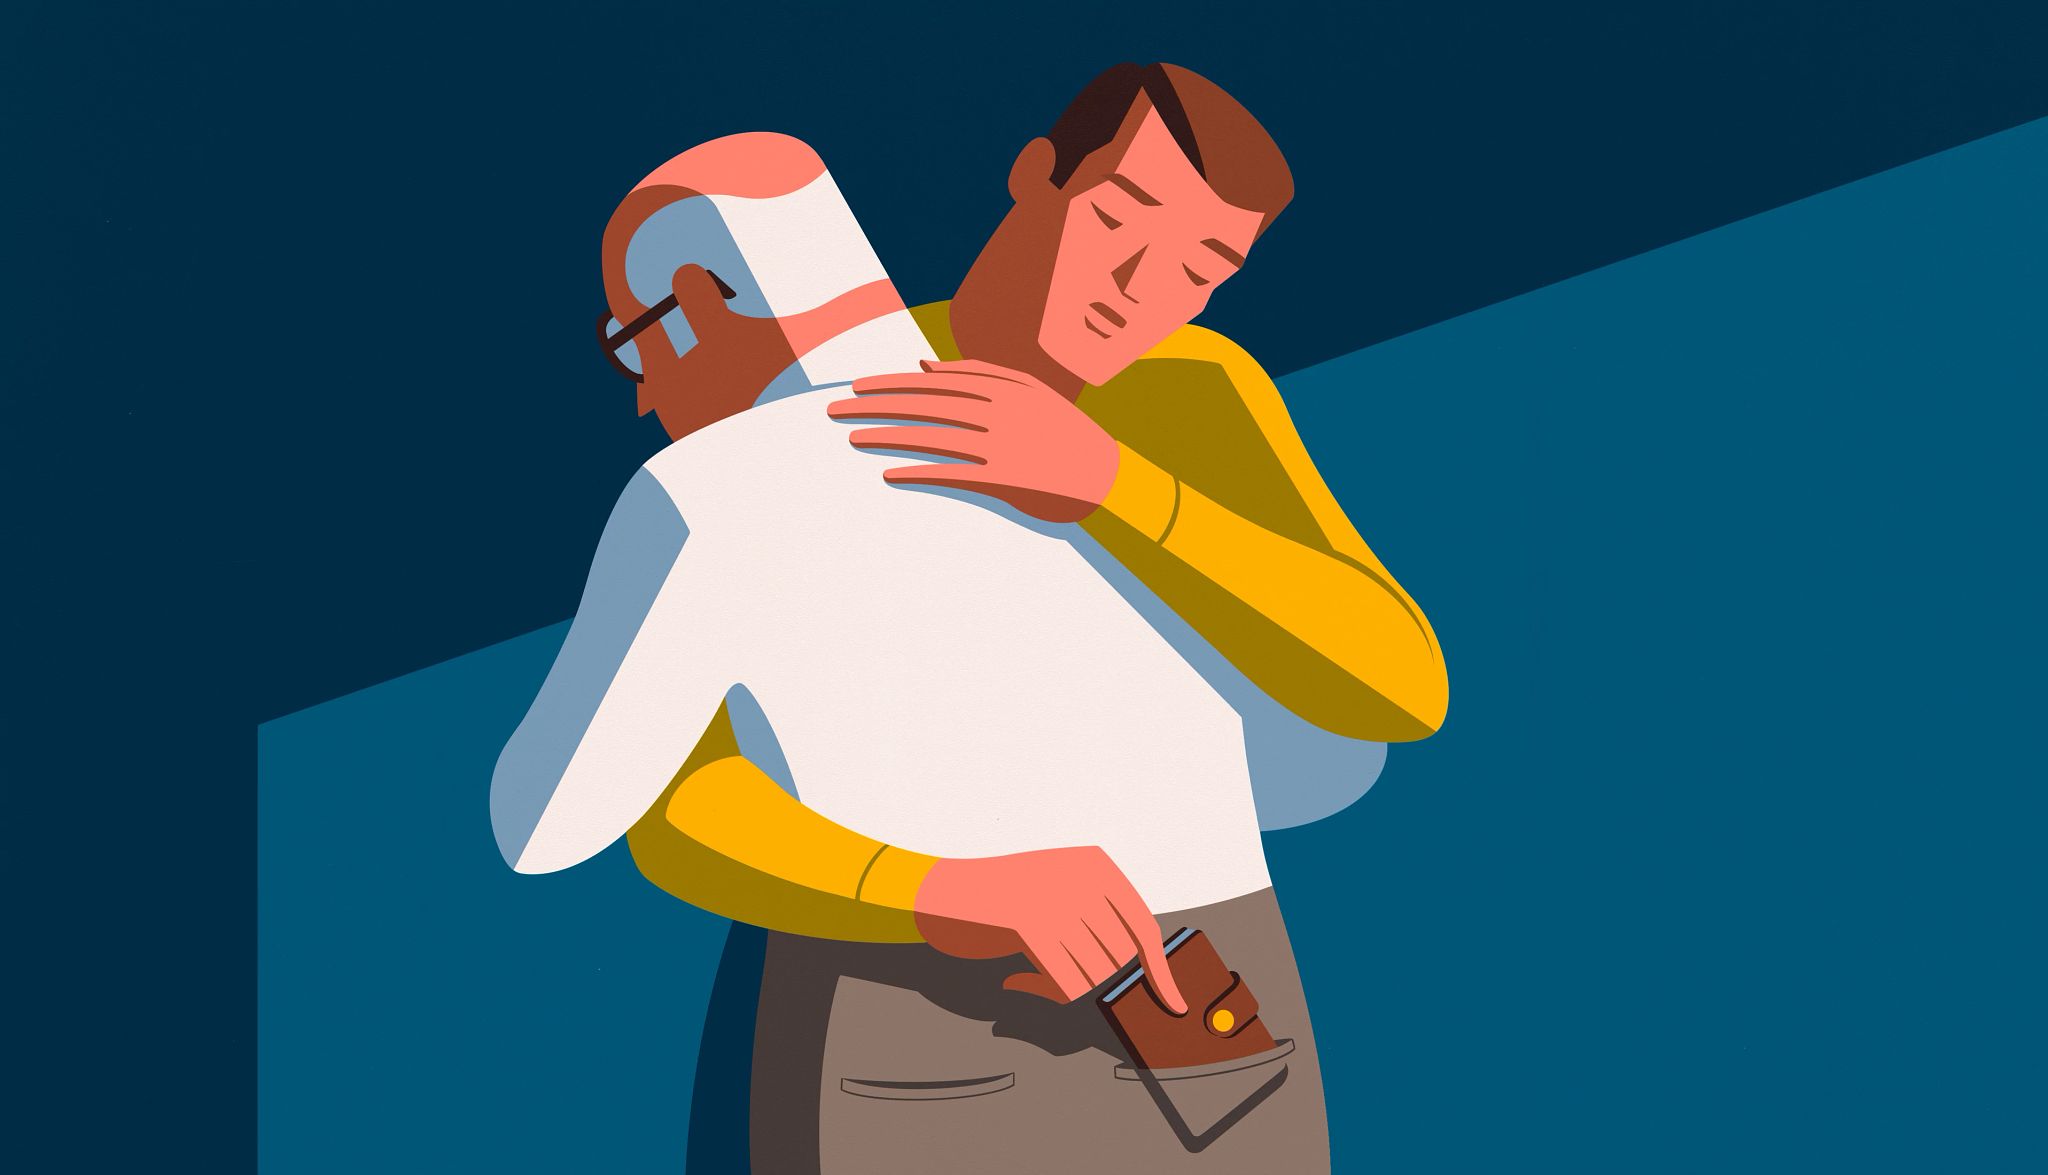 an illustration of a man hugging an older man while also stealing his wallet